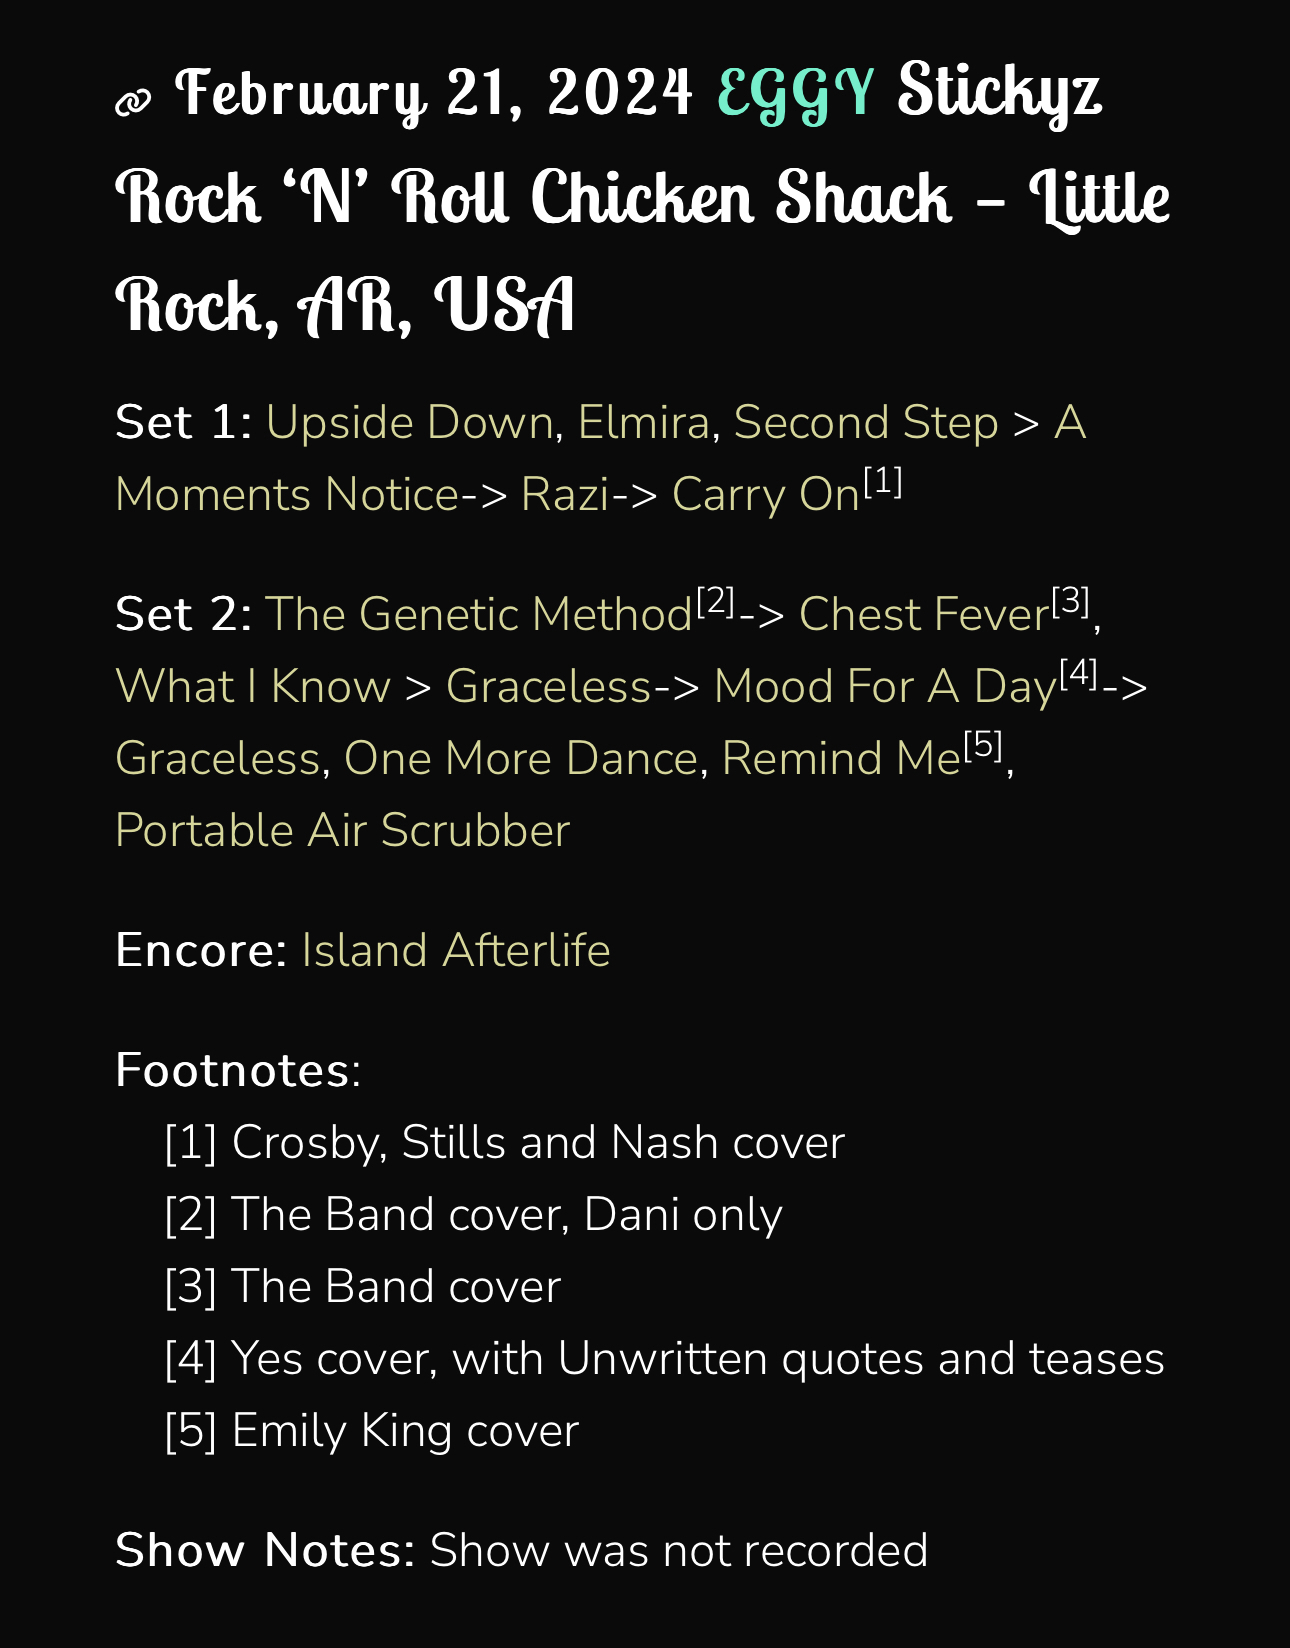 The image is a text-based setlist for a band called Eggy for their concert at Stickyz Rock ‘N’ Roll Chicken Shack in Little Rock, AR, USA, on February 21, 2024. It lists two sets of songs